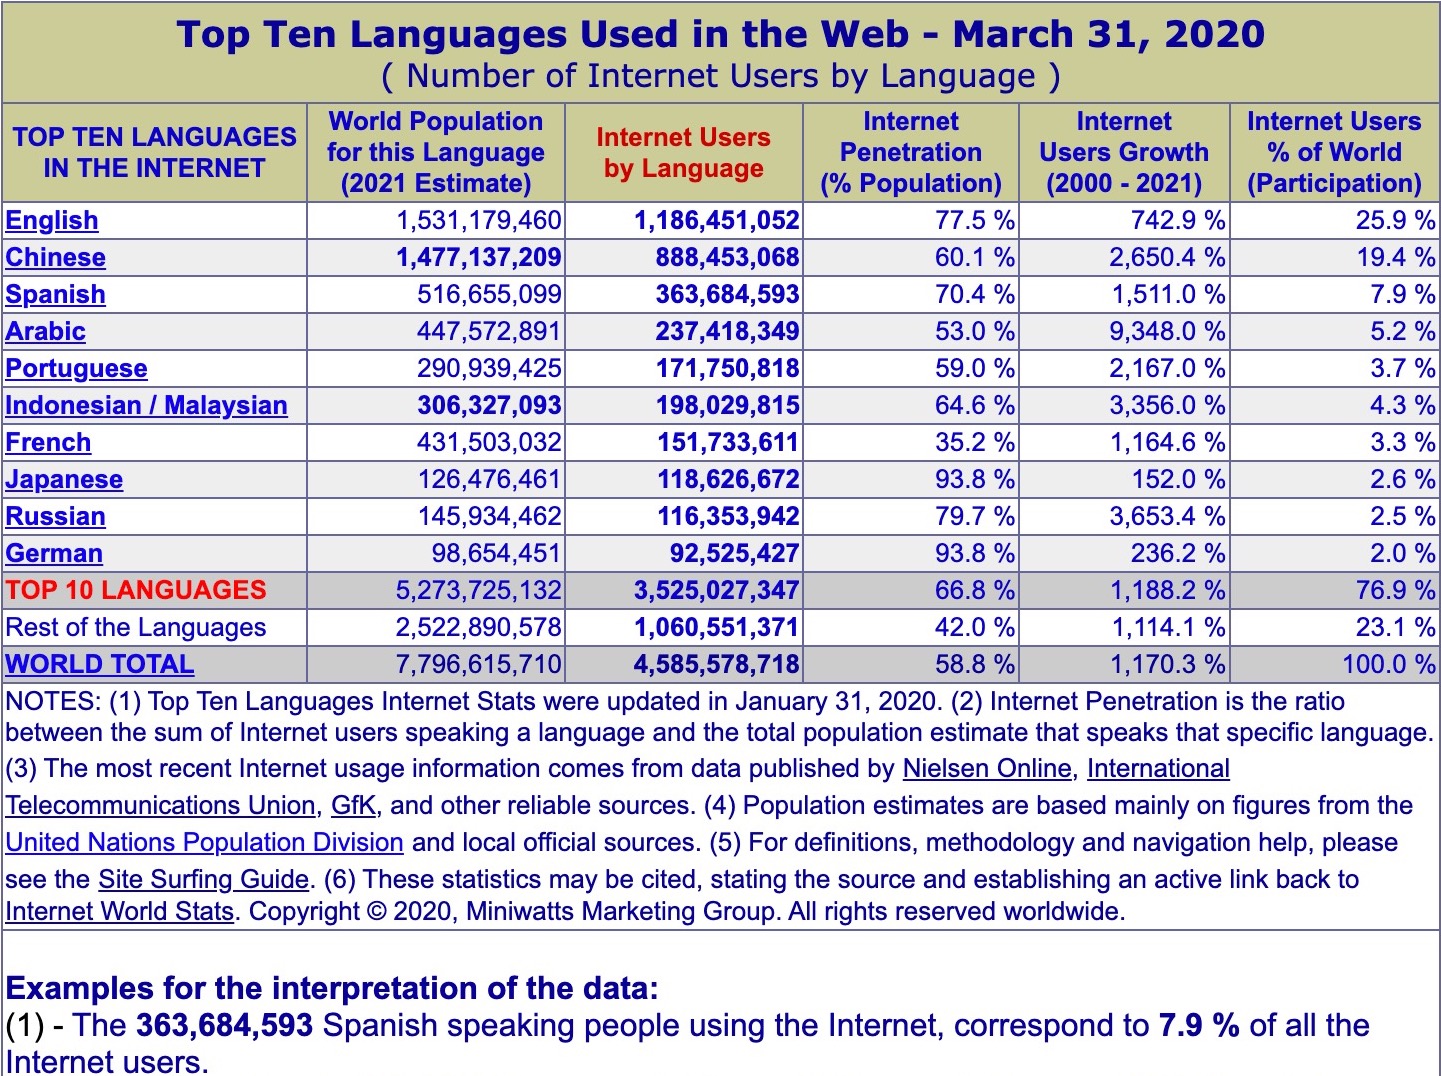 Top 10 Languages Used Online